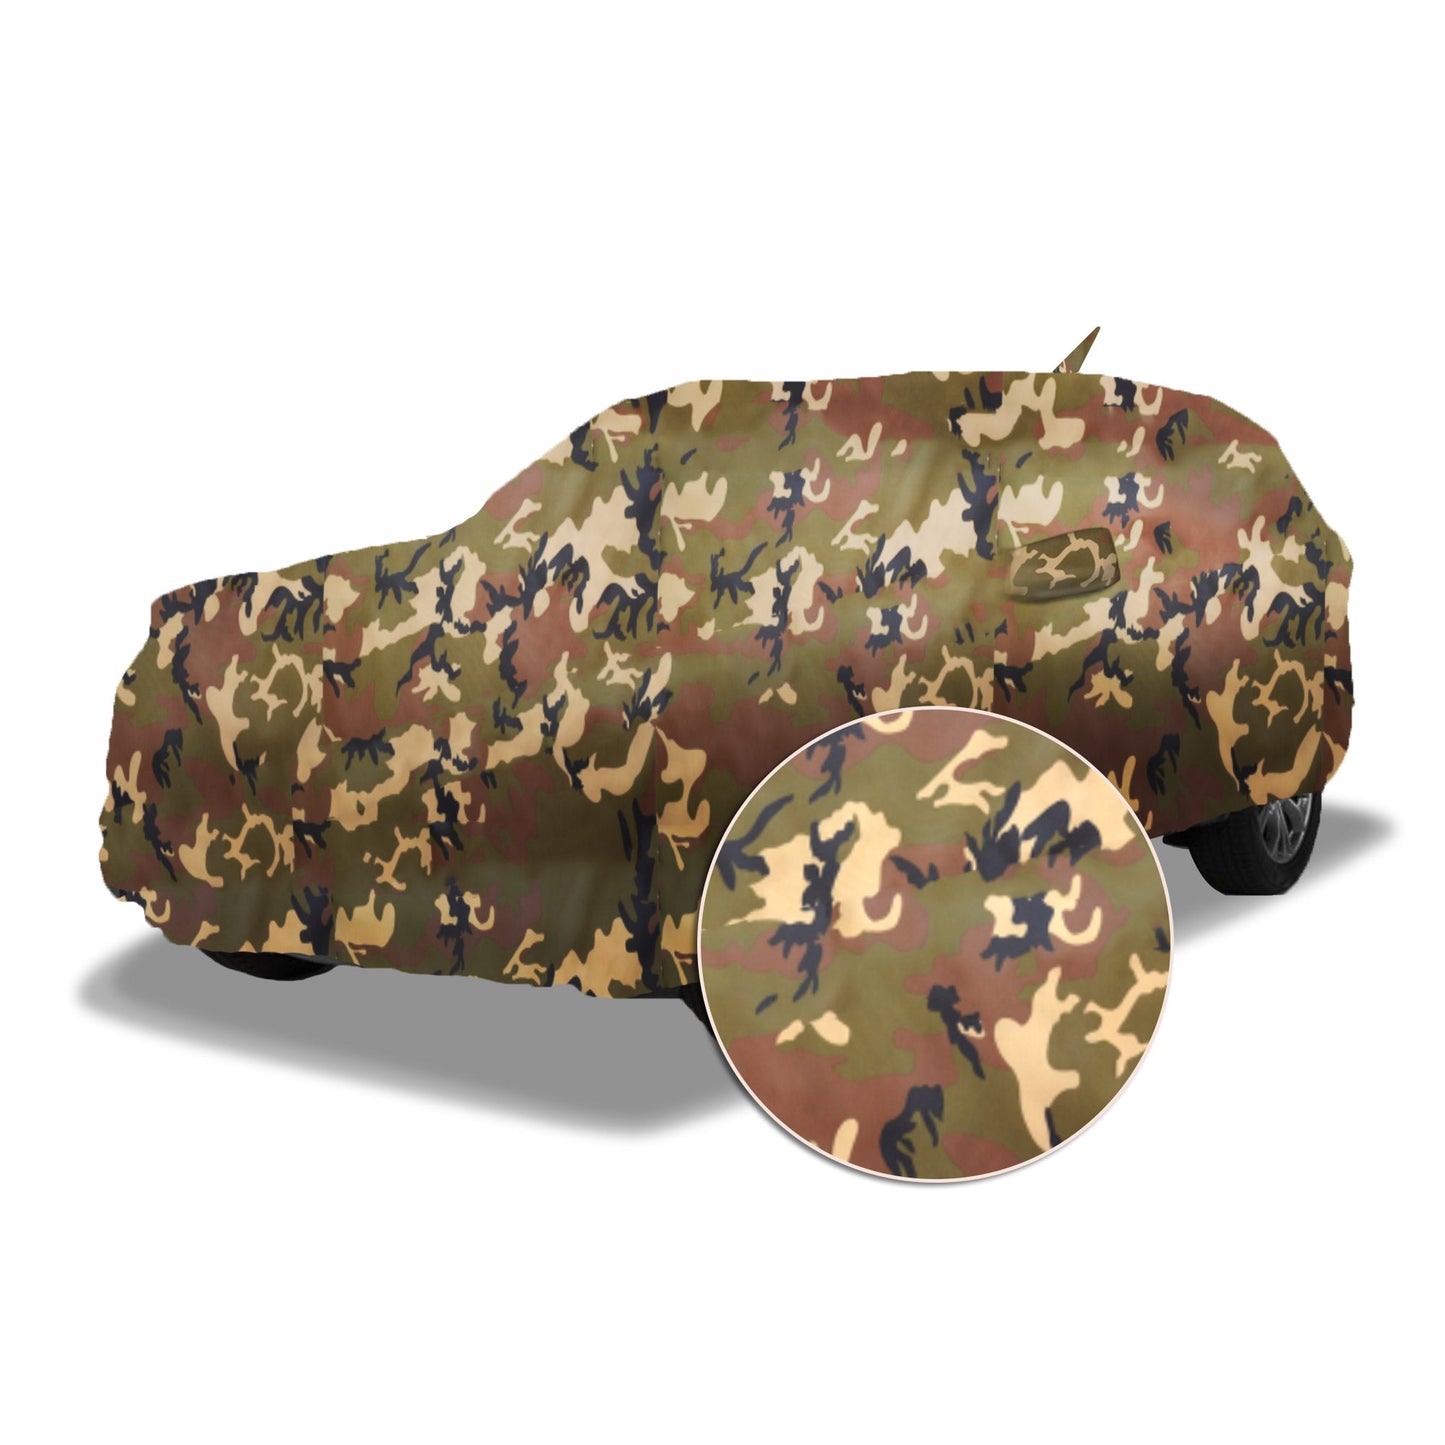 Ascot Hyundai Santro Xing Car Body Cover 2003-2018 Model Extra Strong & Dust Proof Jungle Military Car Cover with UV Proof & Water-Resistant Coating